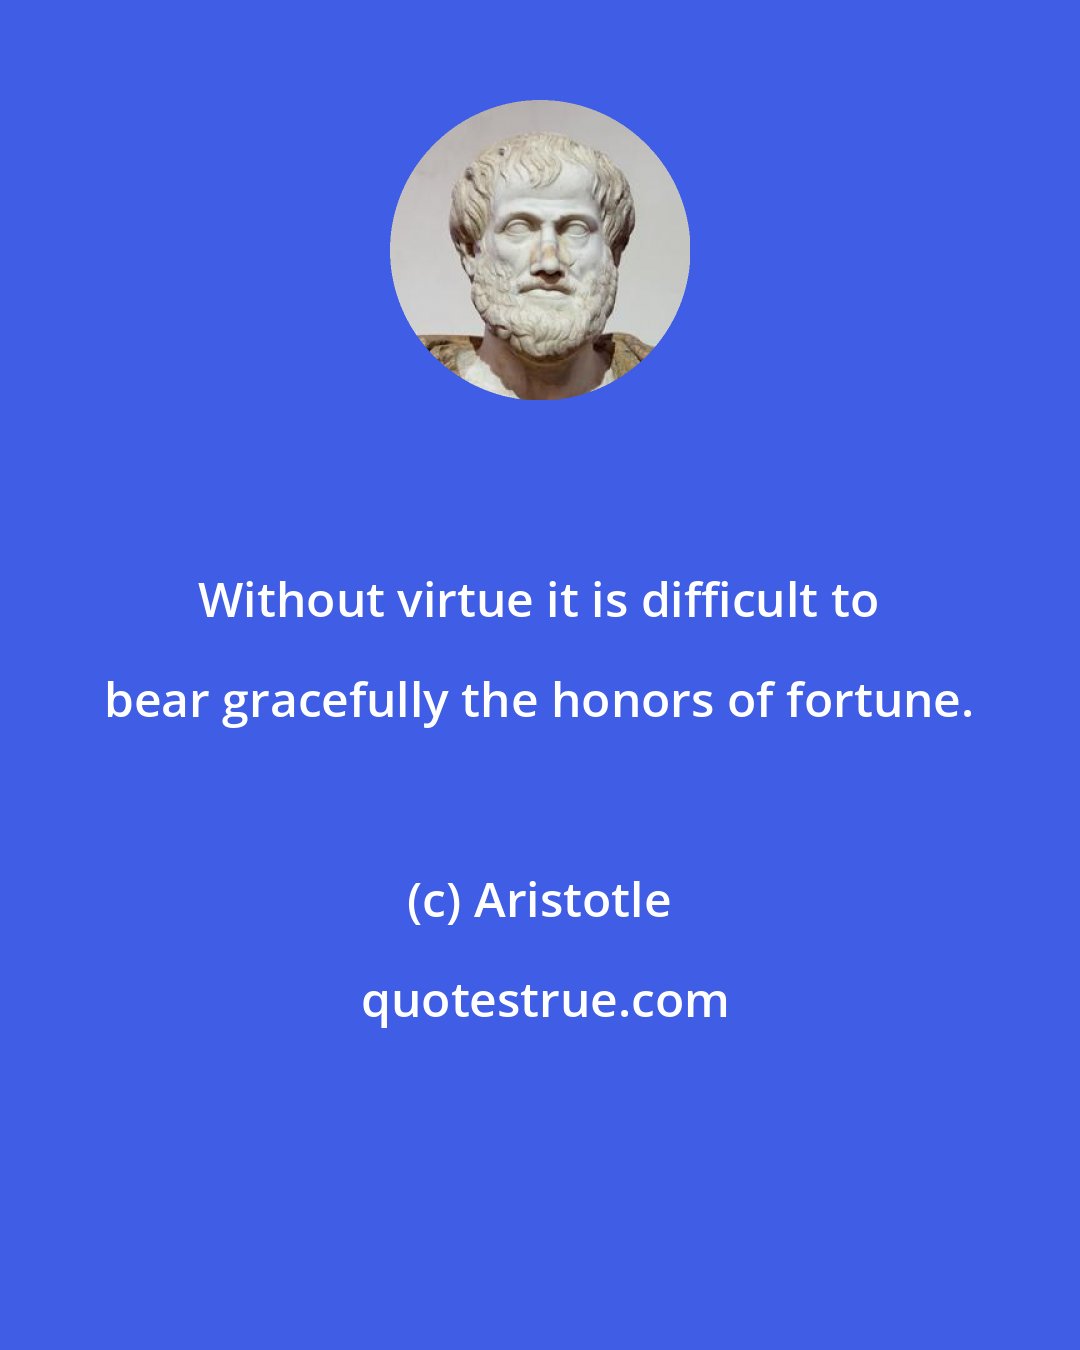 Aristotle: Without virtue it is difficult to bear gracefully the honors of fortune.